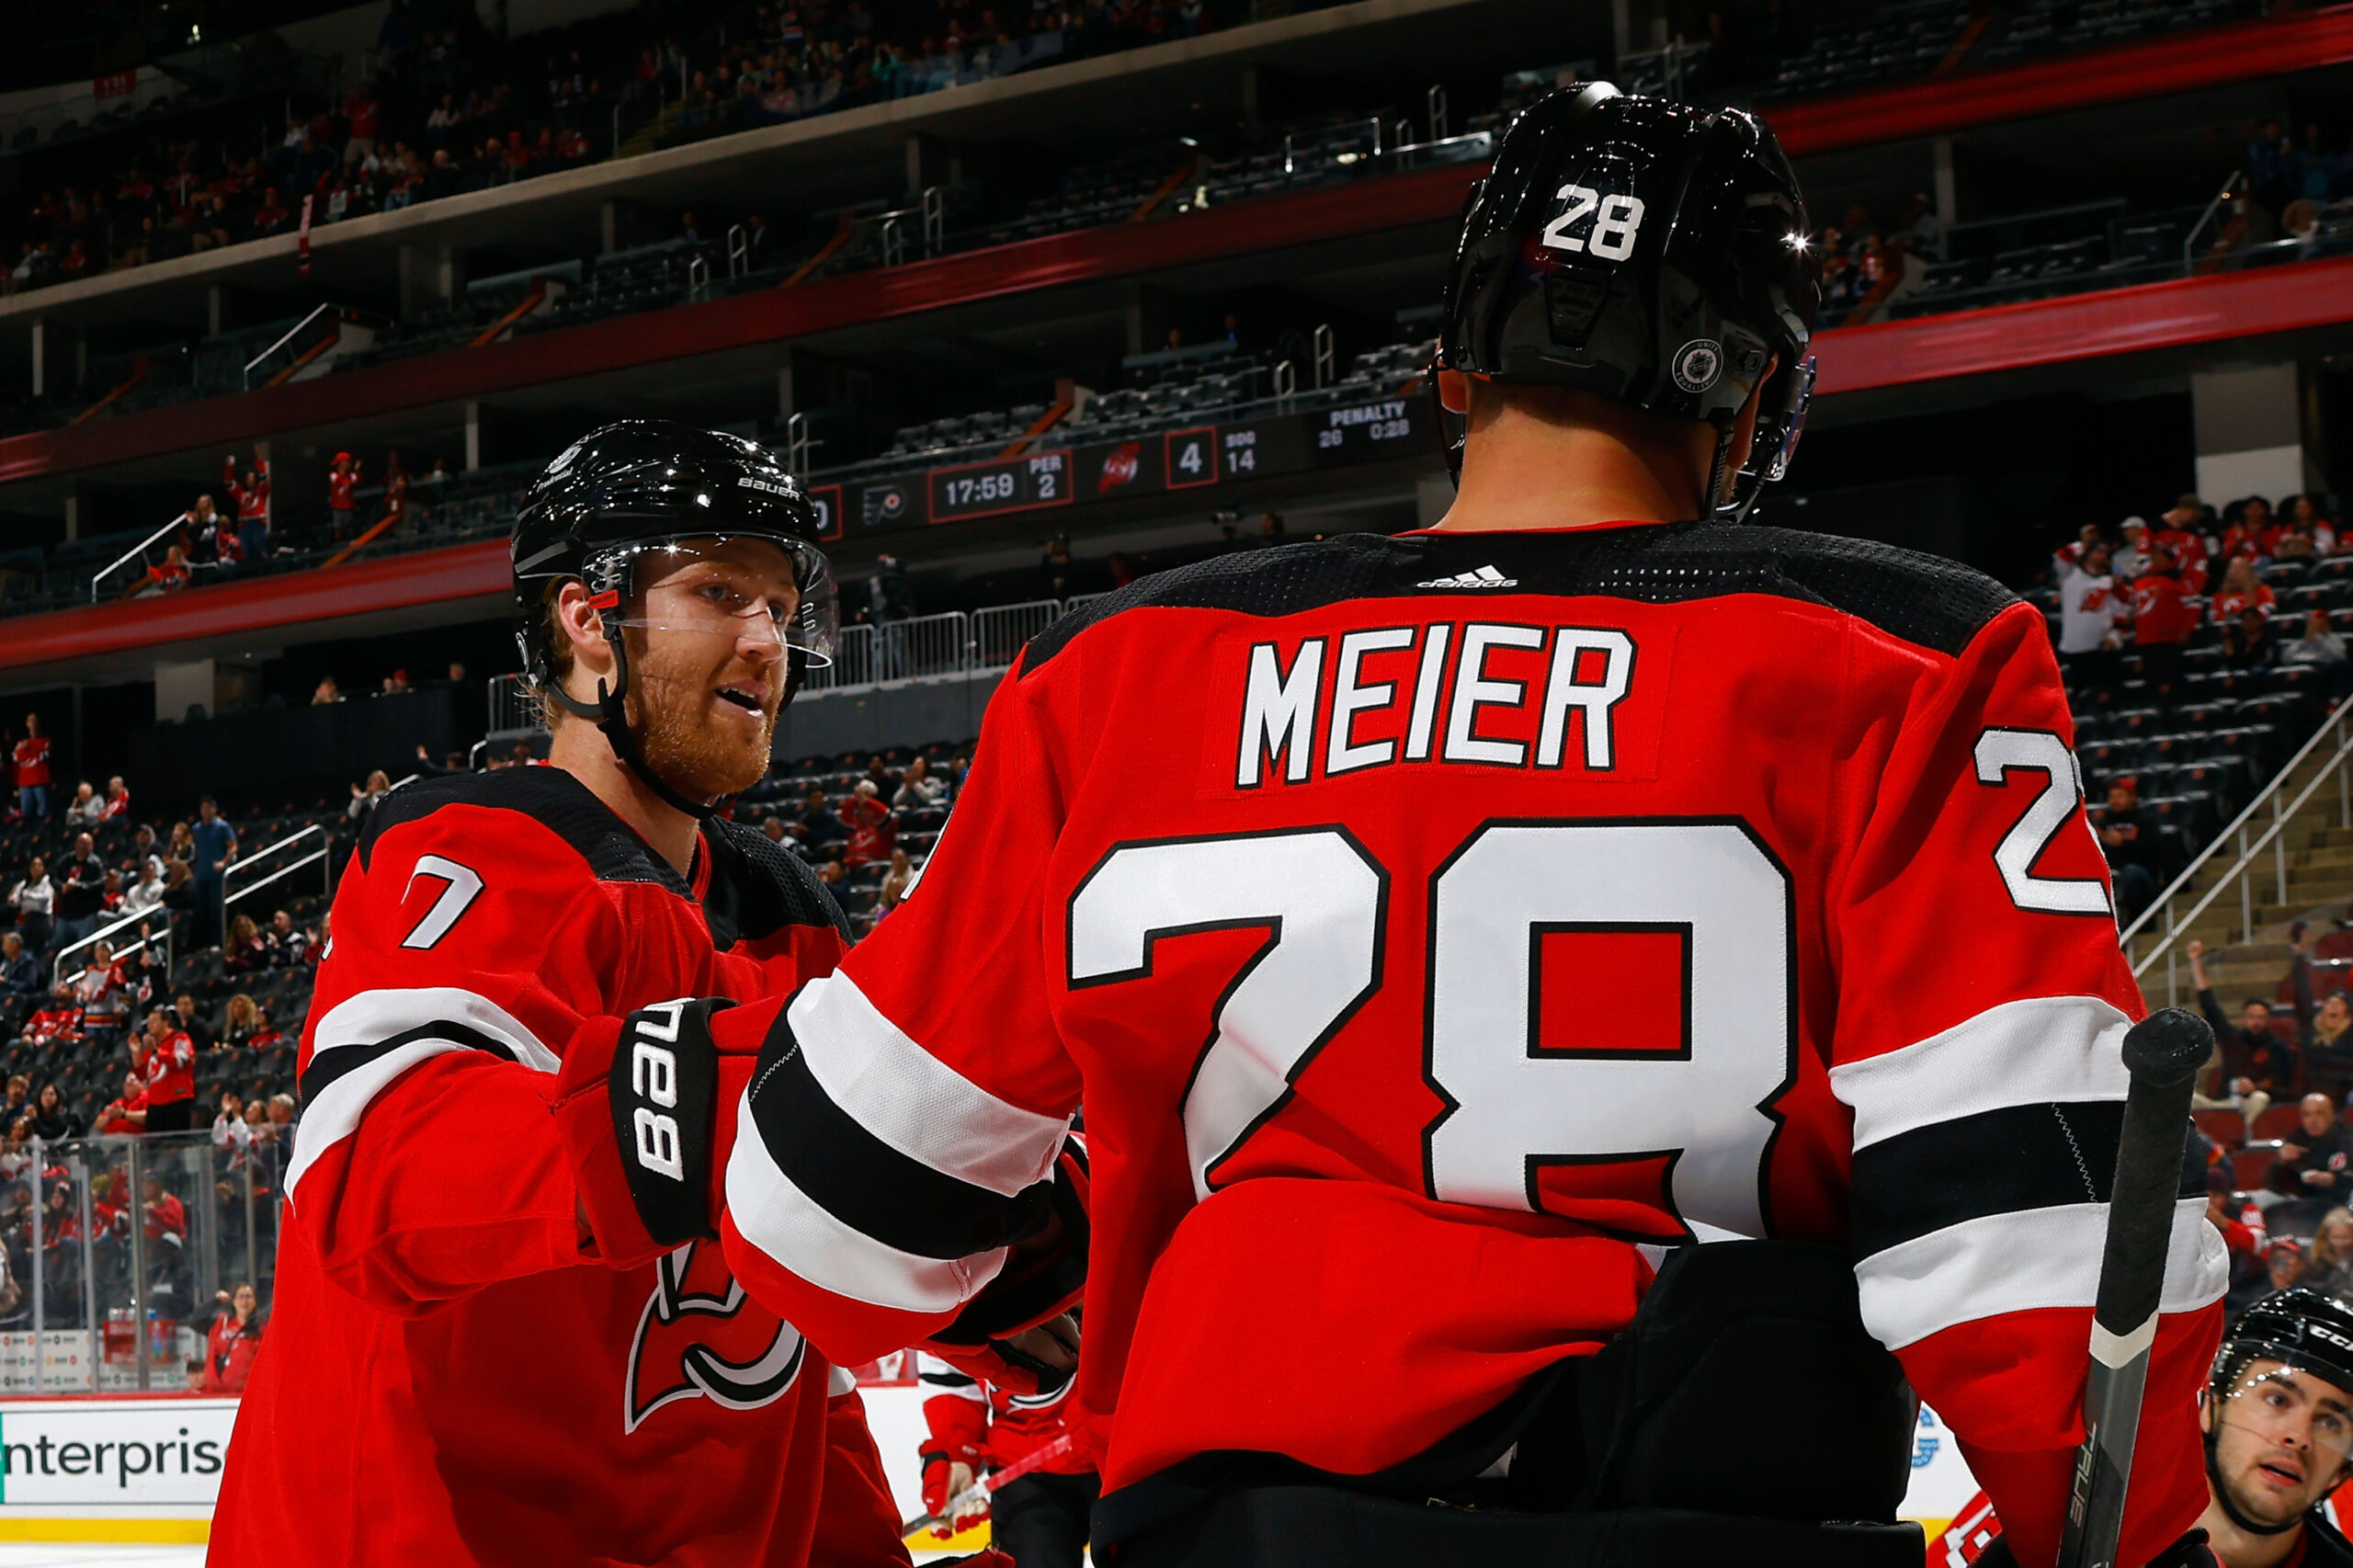 New Jersey Devils defeat Montreal Canadiens 4-2